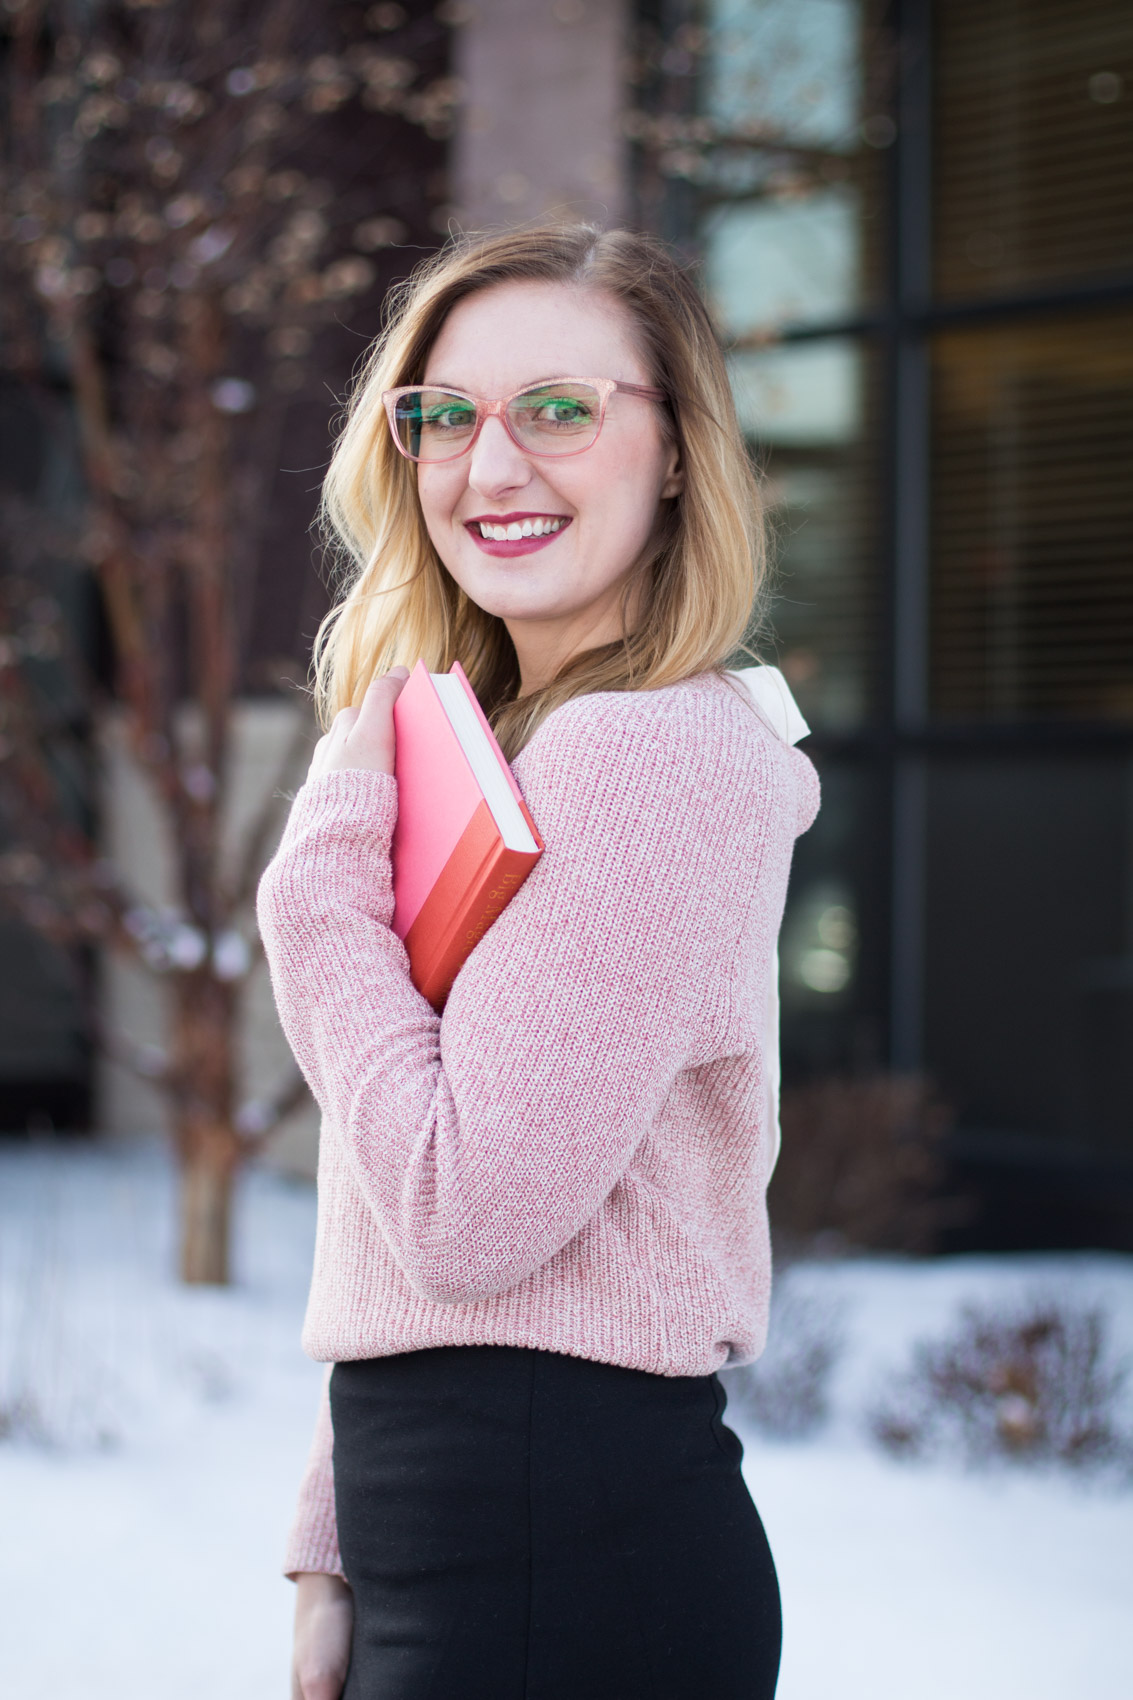 Heart sweaters and bow details lend the perfect romantic touches when it comes to casual Valentine's Day outfit ideas for women! 